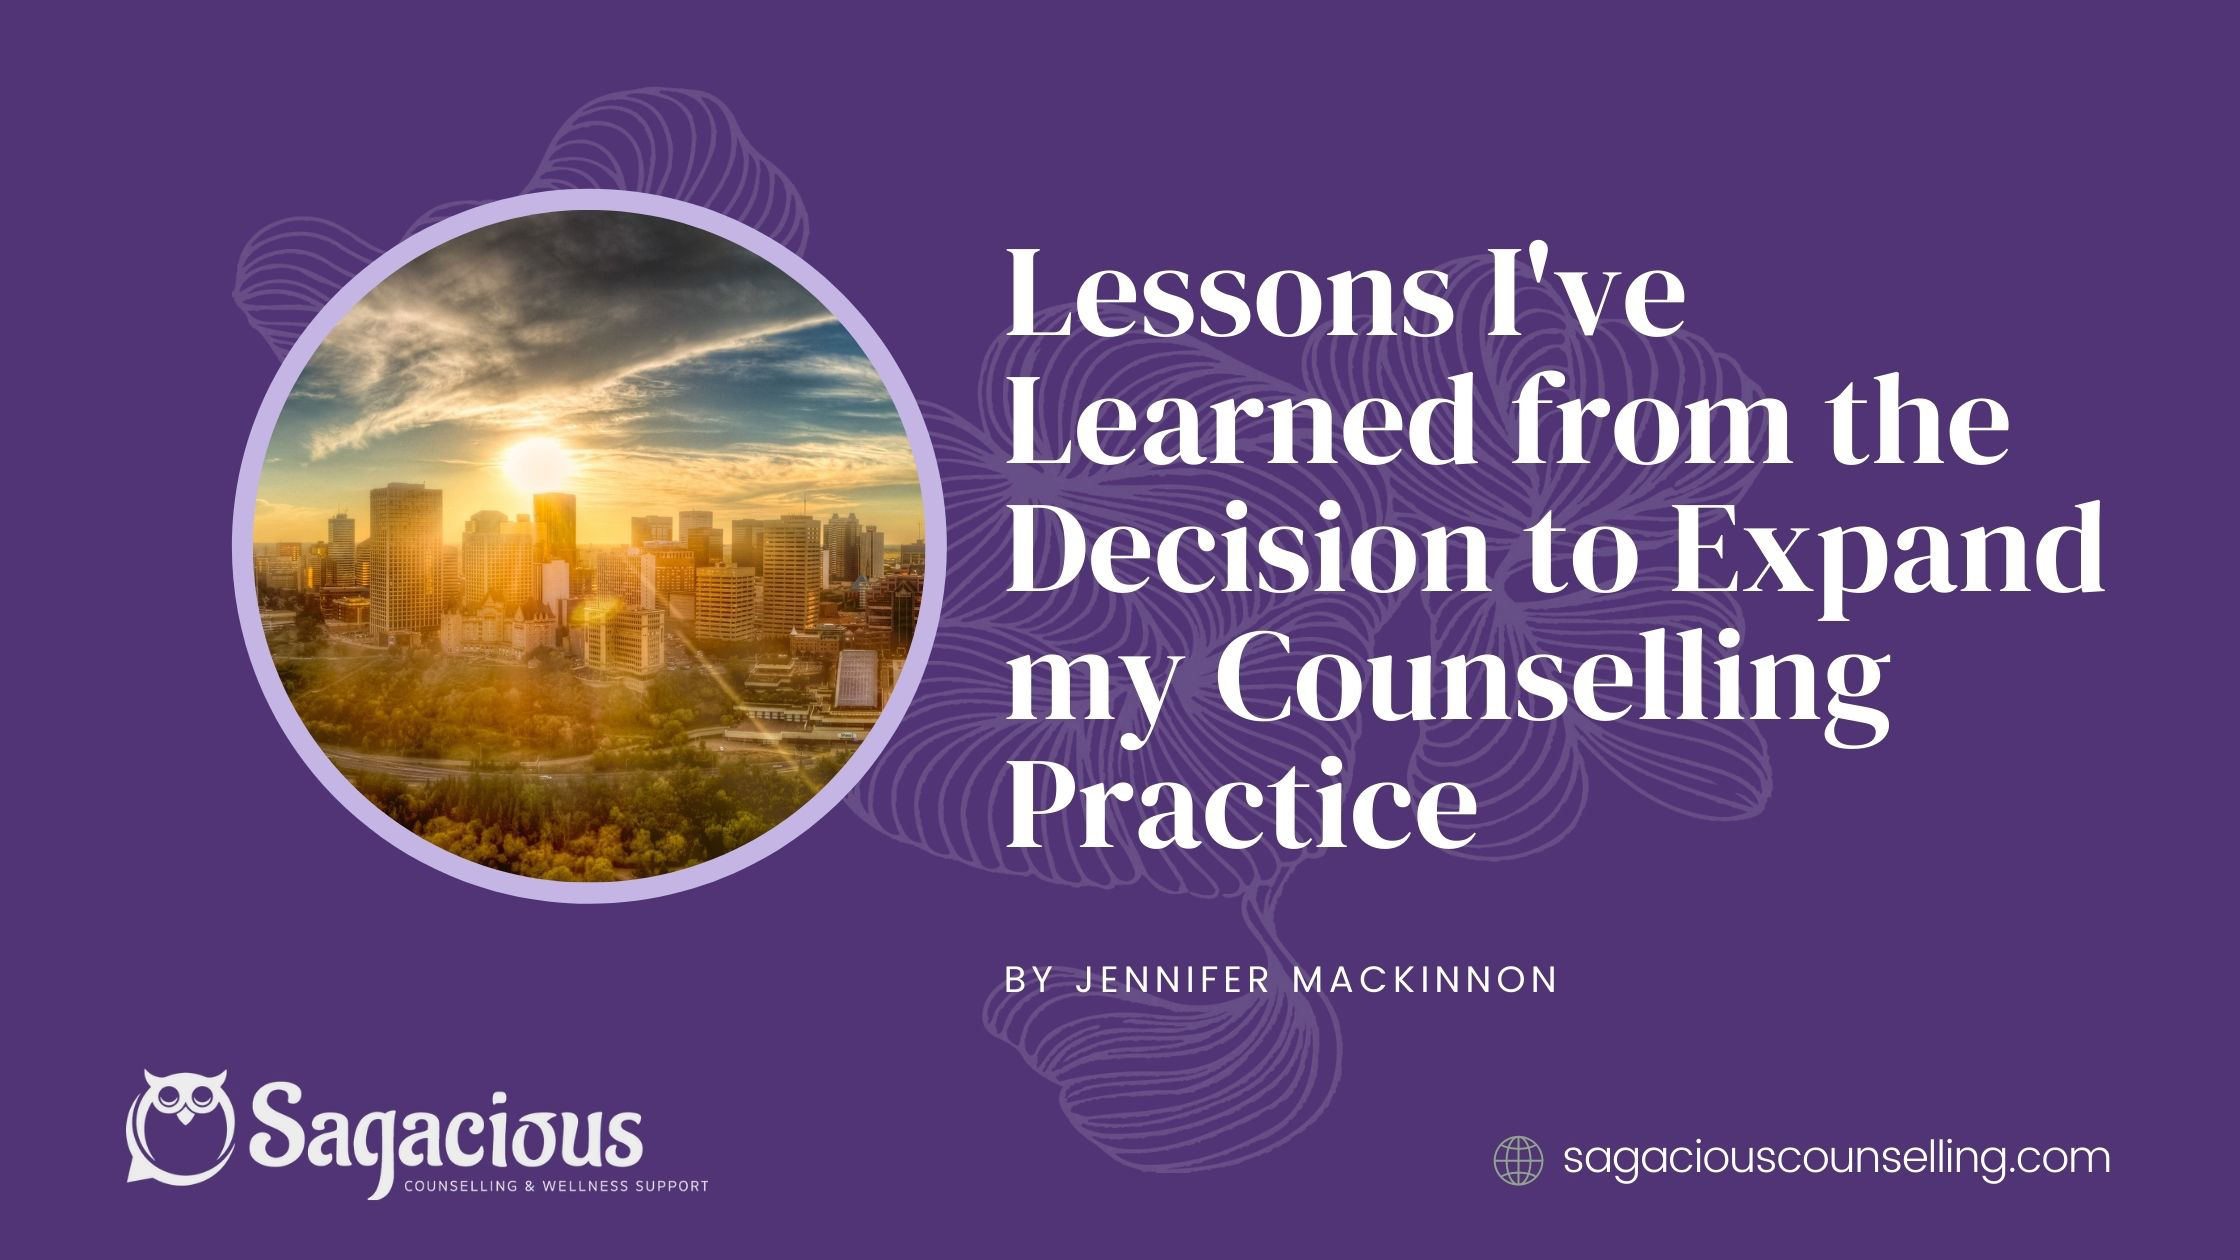 Lessons I've Learned from the Decision to Expand my Counselling Practice